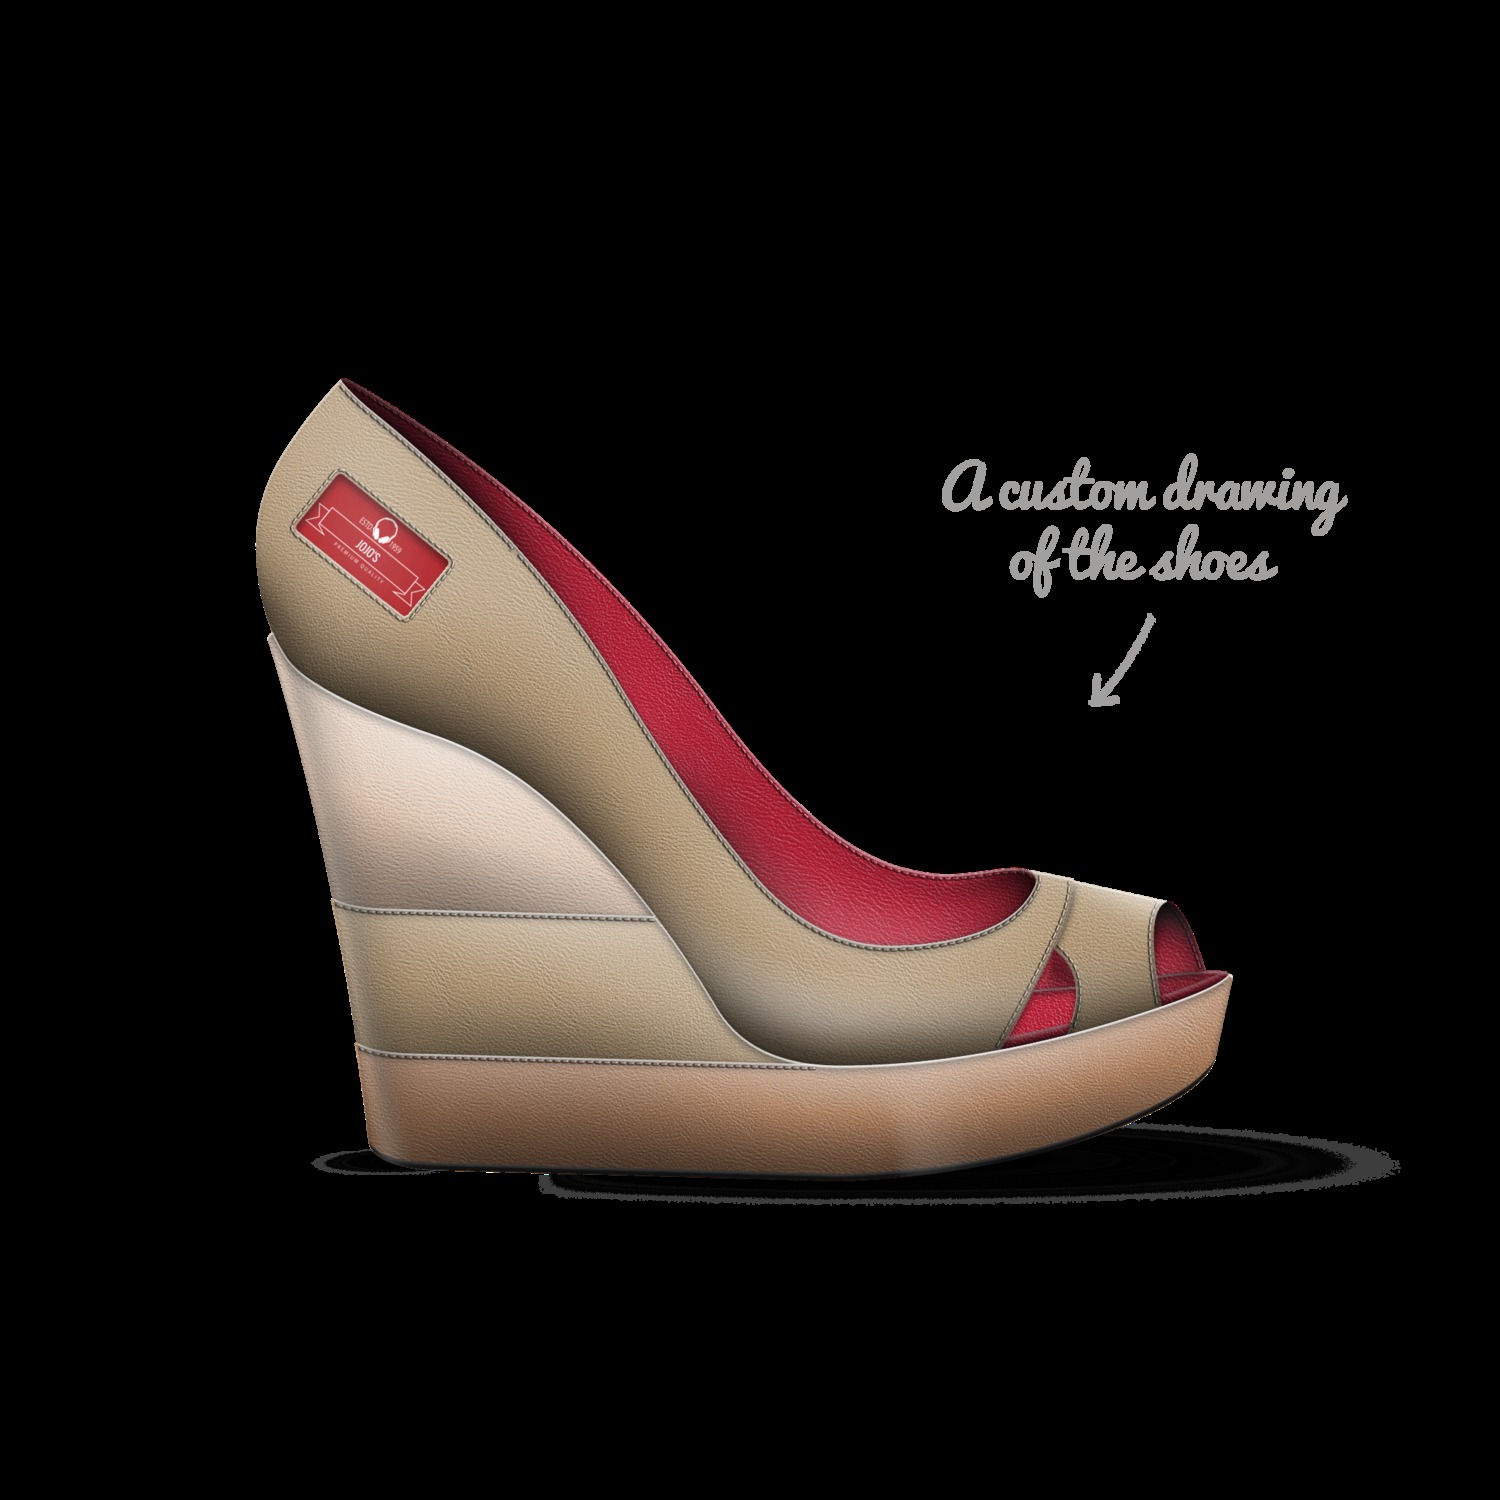 Wedges | A Custom Shoe concept by Jo